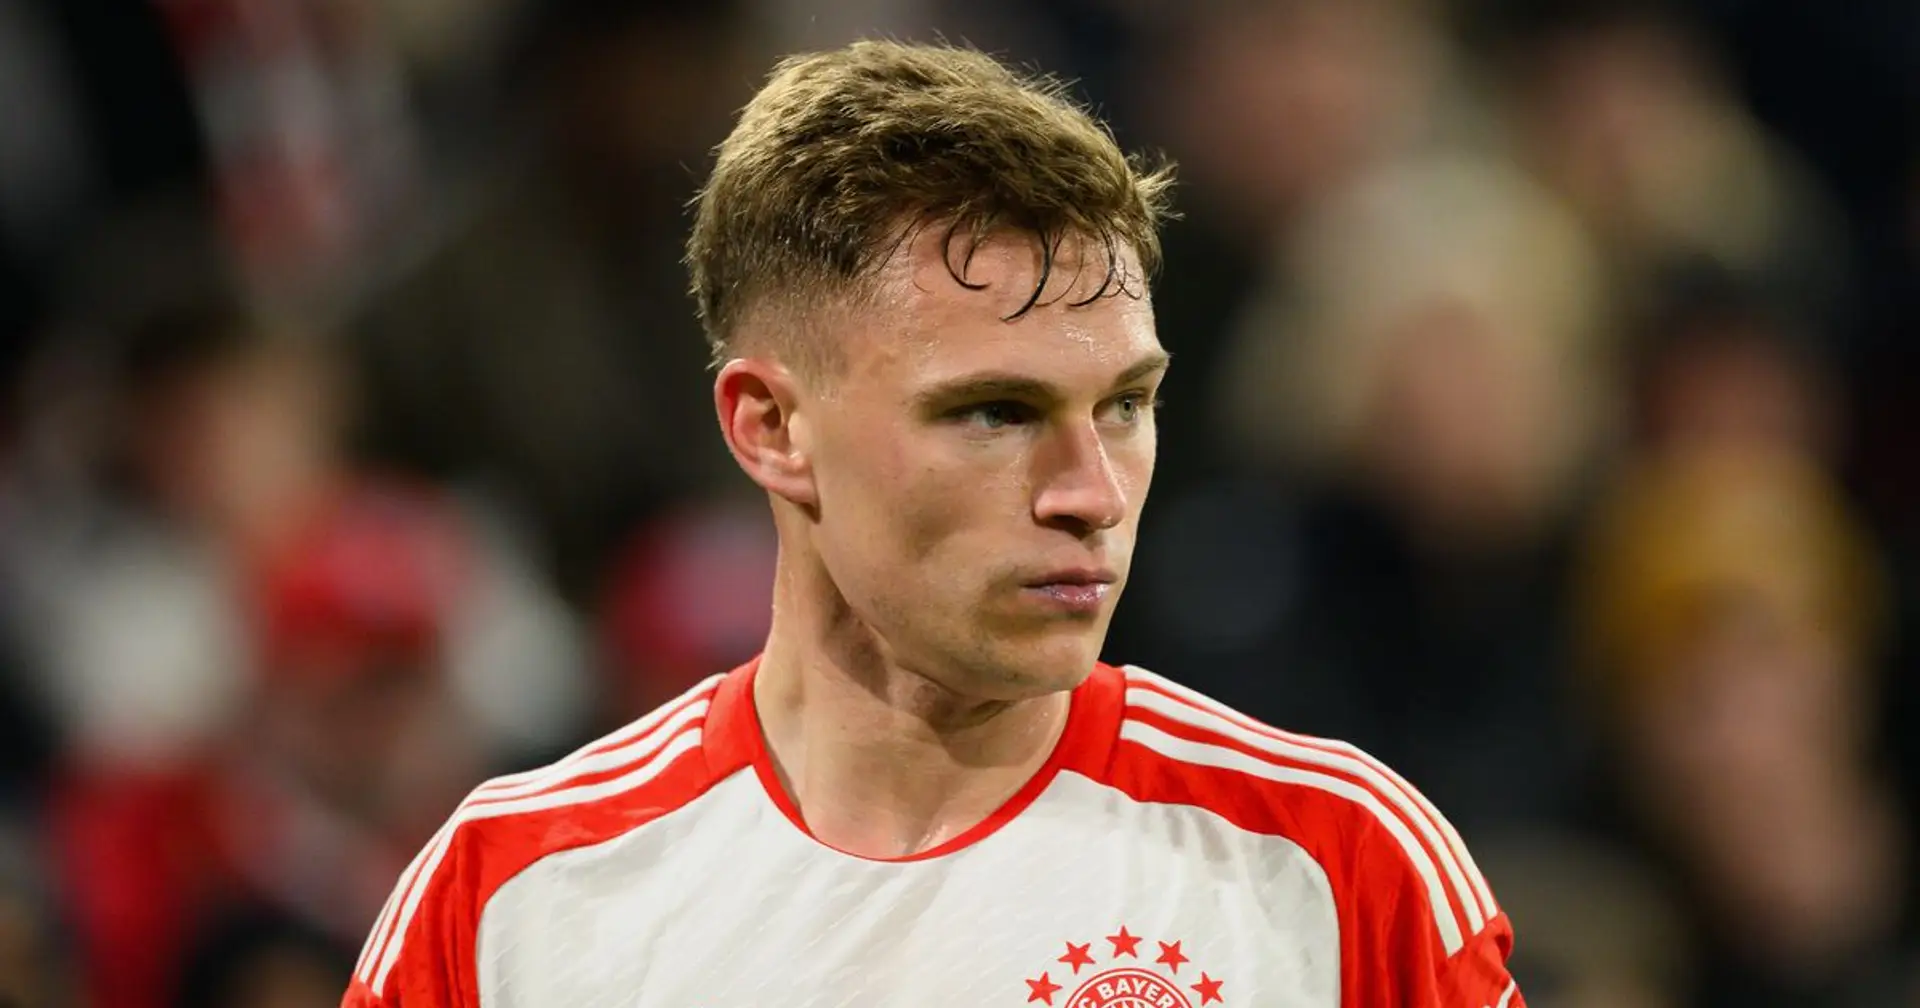 Joshua Kimmich open to Bayern exit, Liverpool one of 5 clubs 'in consideration' (reliability: 4 stars)